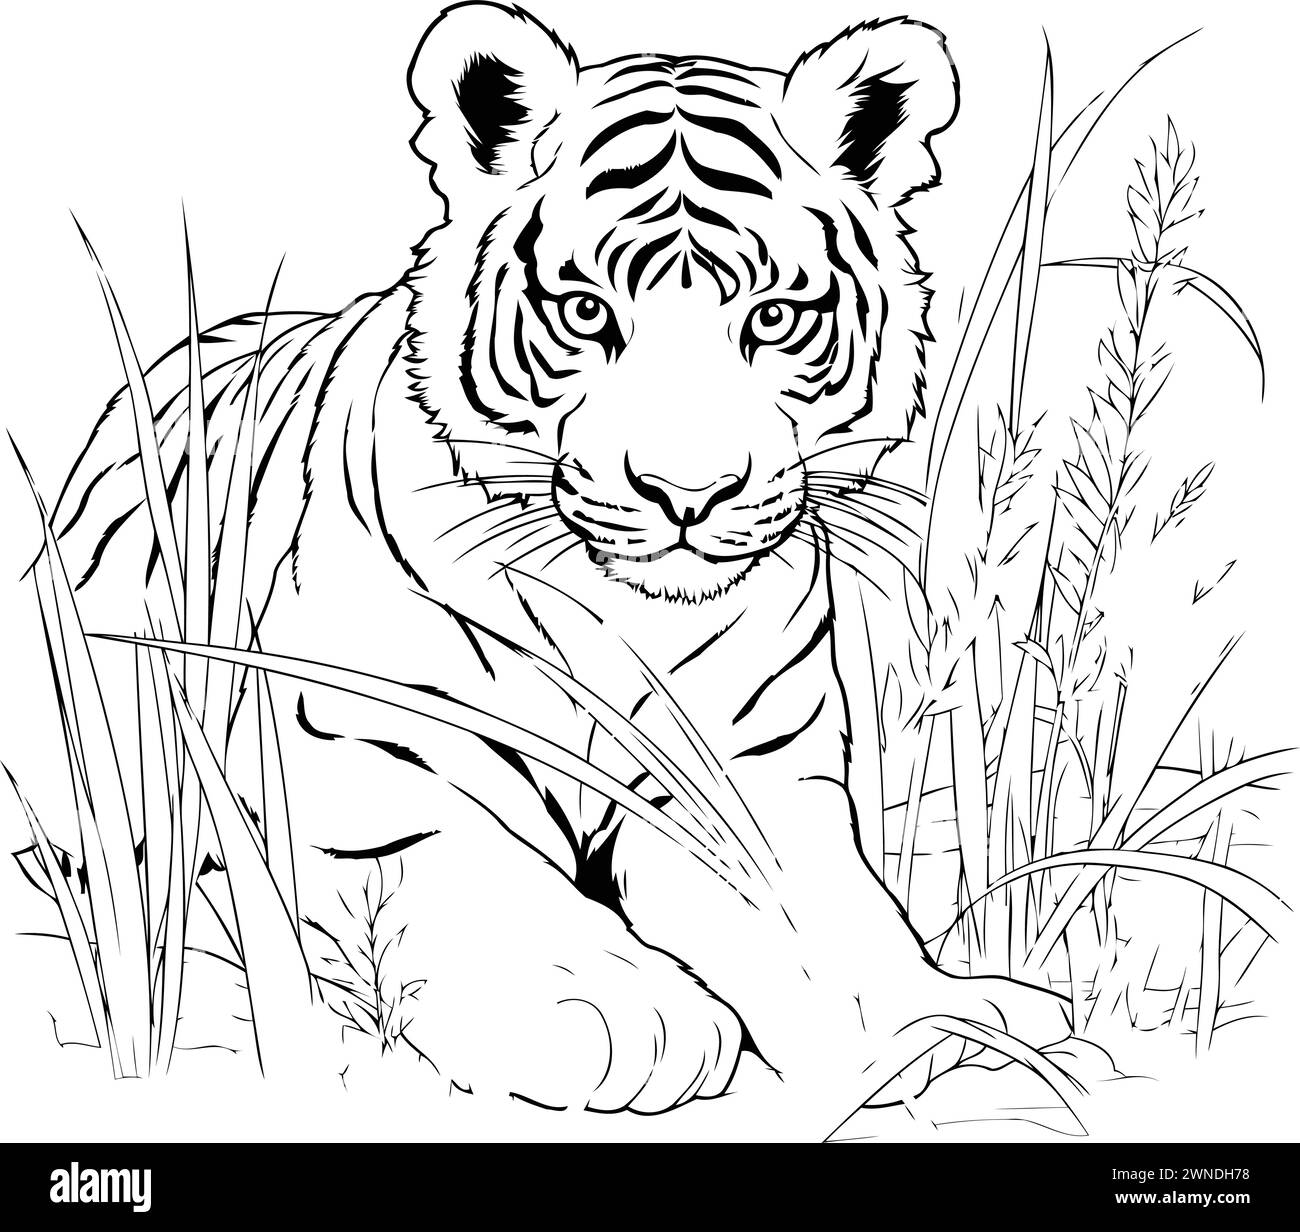 Tiger sitting in grass. Black and white vector illustration for ...